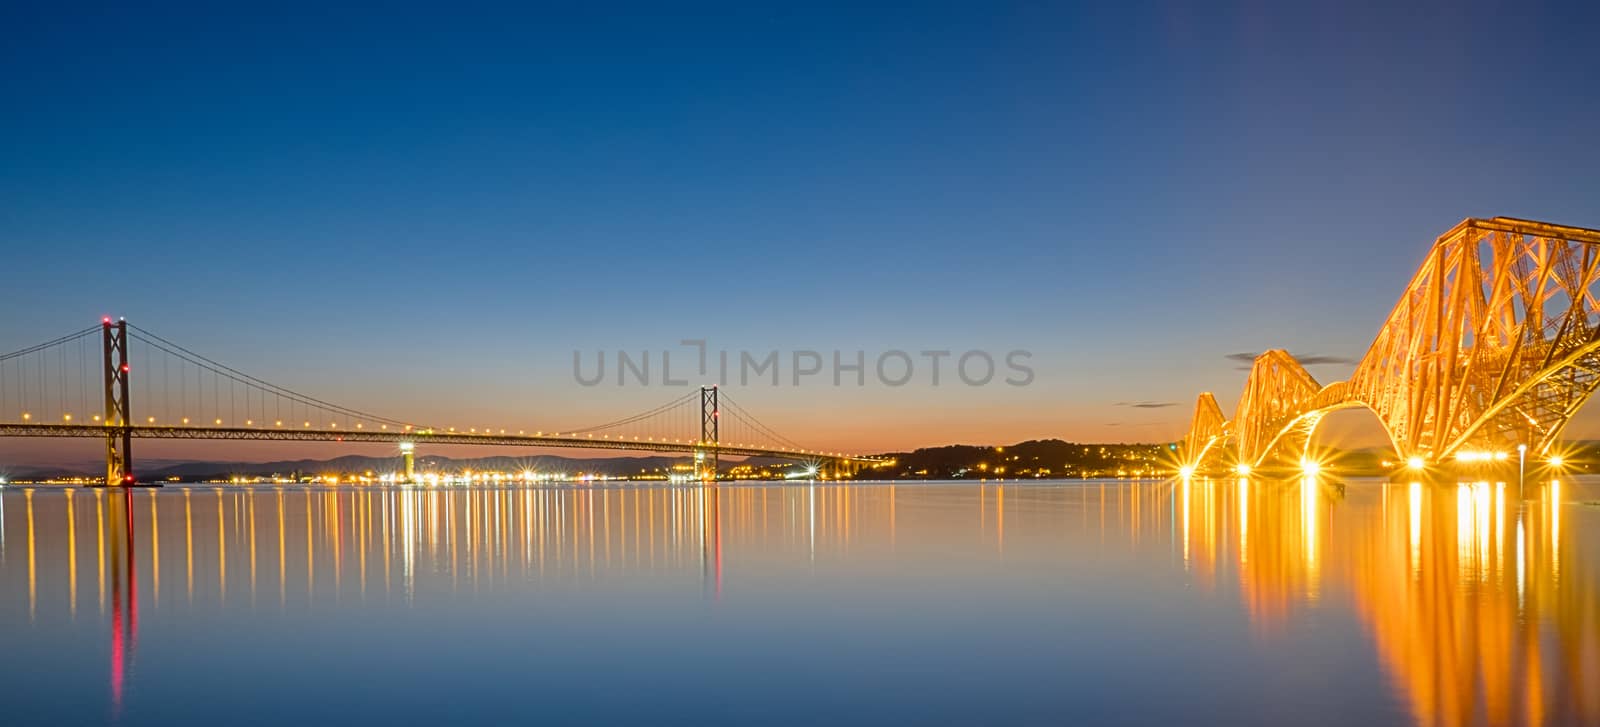 Panorama of the two bridges over the Firth of Forth in Scotland at dawn